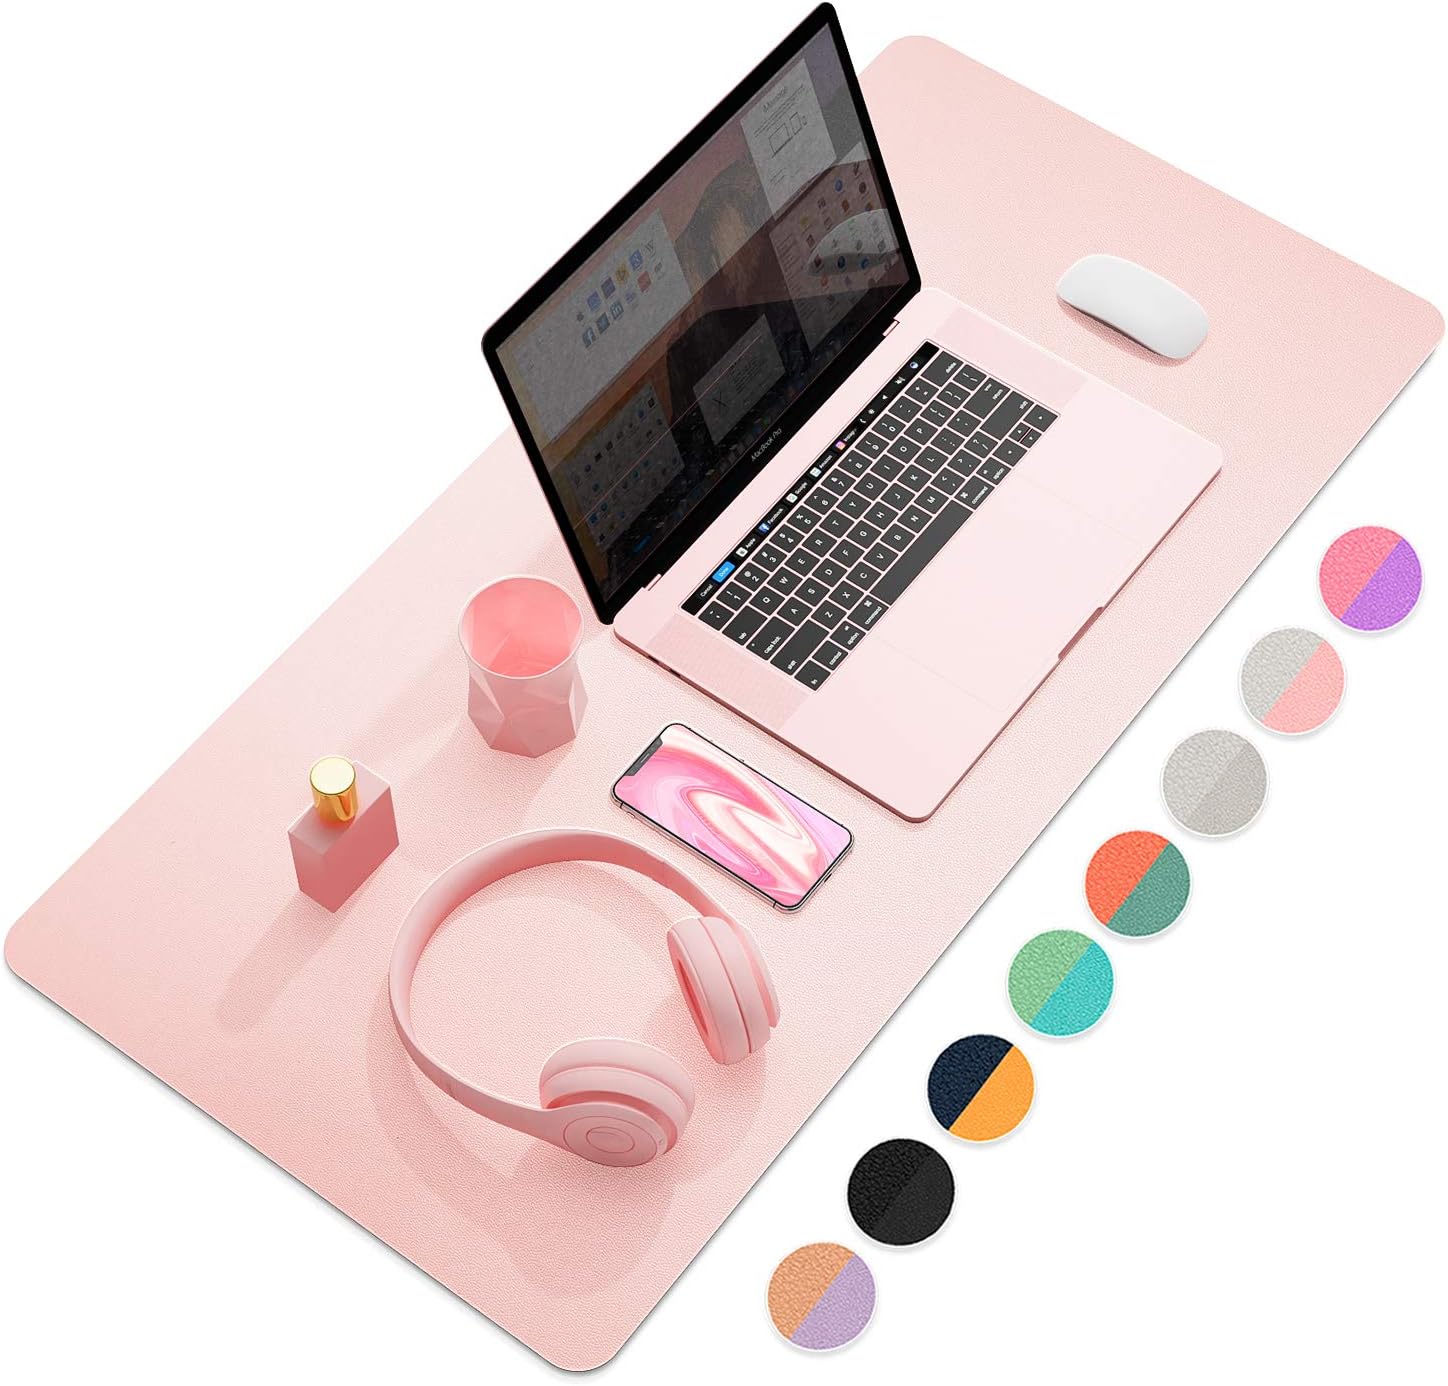 YSAGi Desk Mat, Mouse Pad,Waterproof Desk Pad,Large Mouse pad for Desk, Leather Desk Pad Large for Keyboard and Mouse,Dual-Sided Mouse Mat for Office and Home (35.4" x 17", Pink)